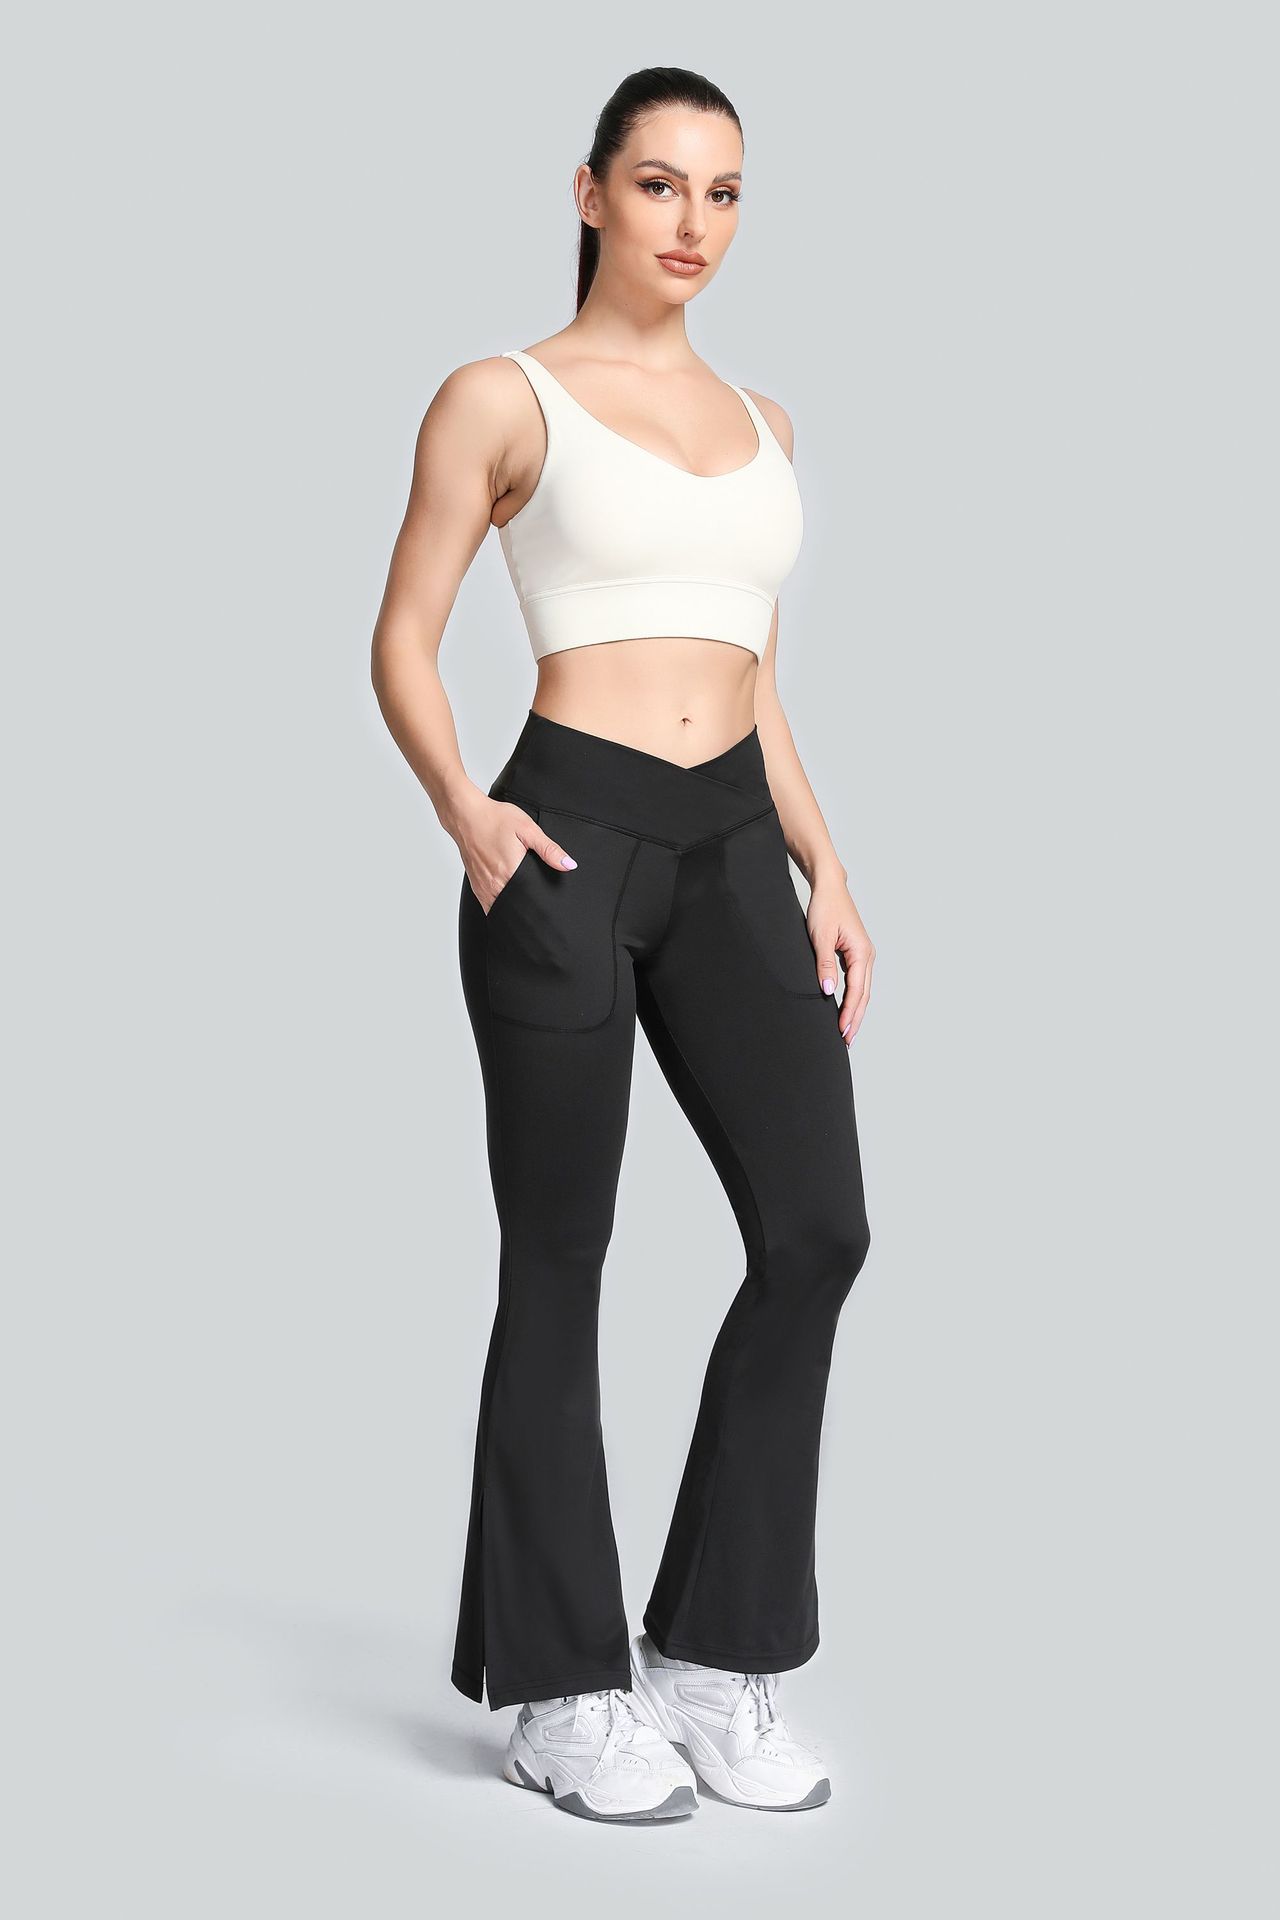 where can i find low rise yoga pants